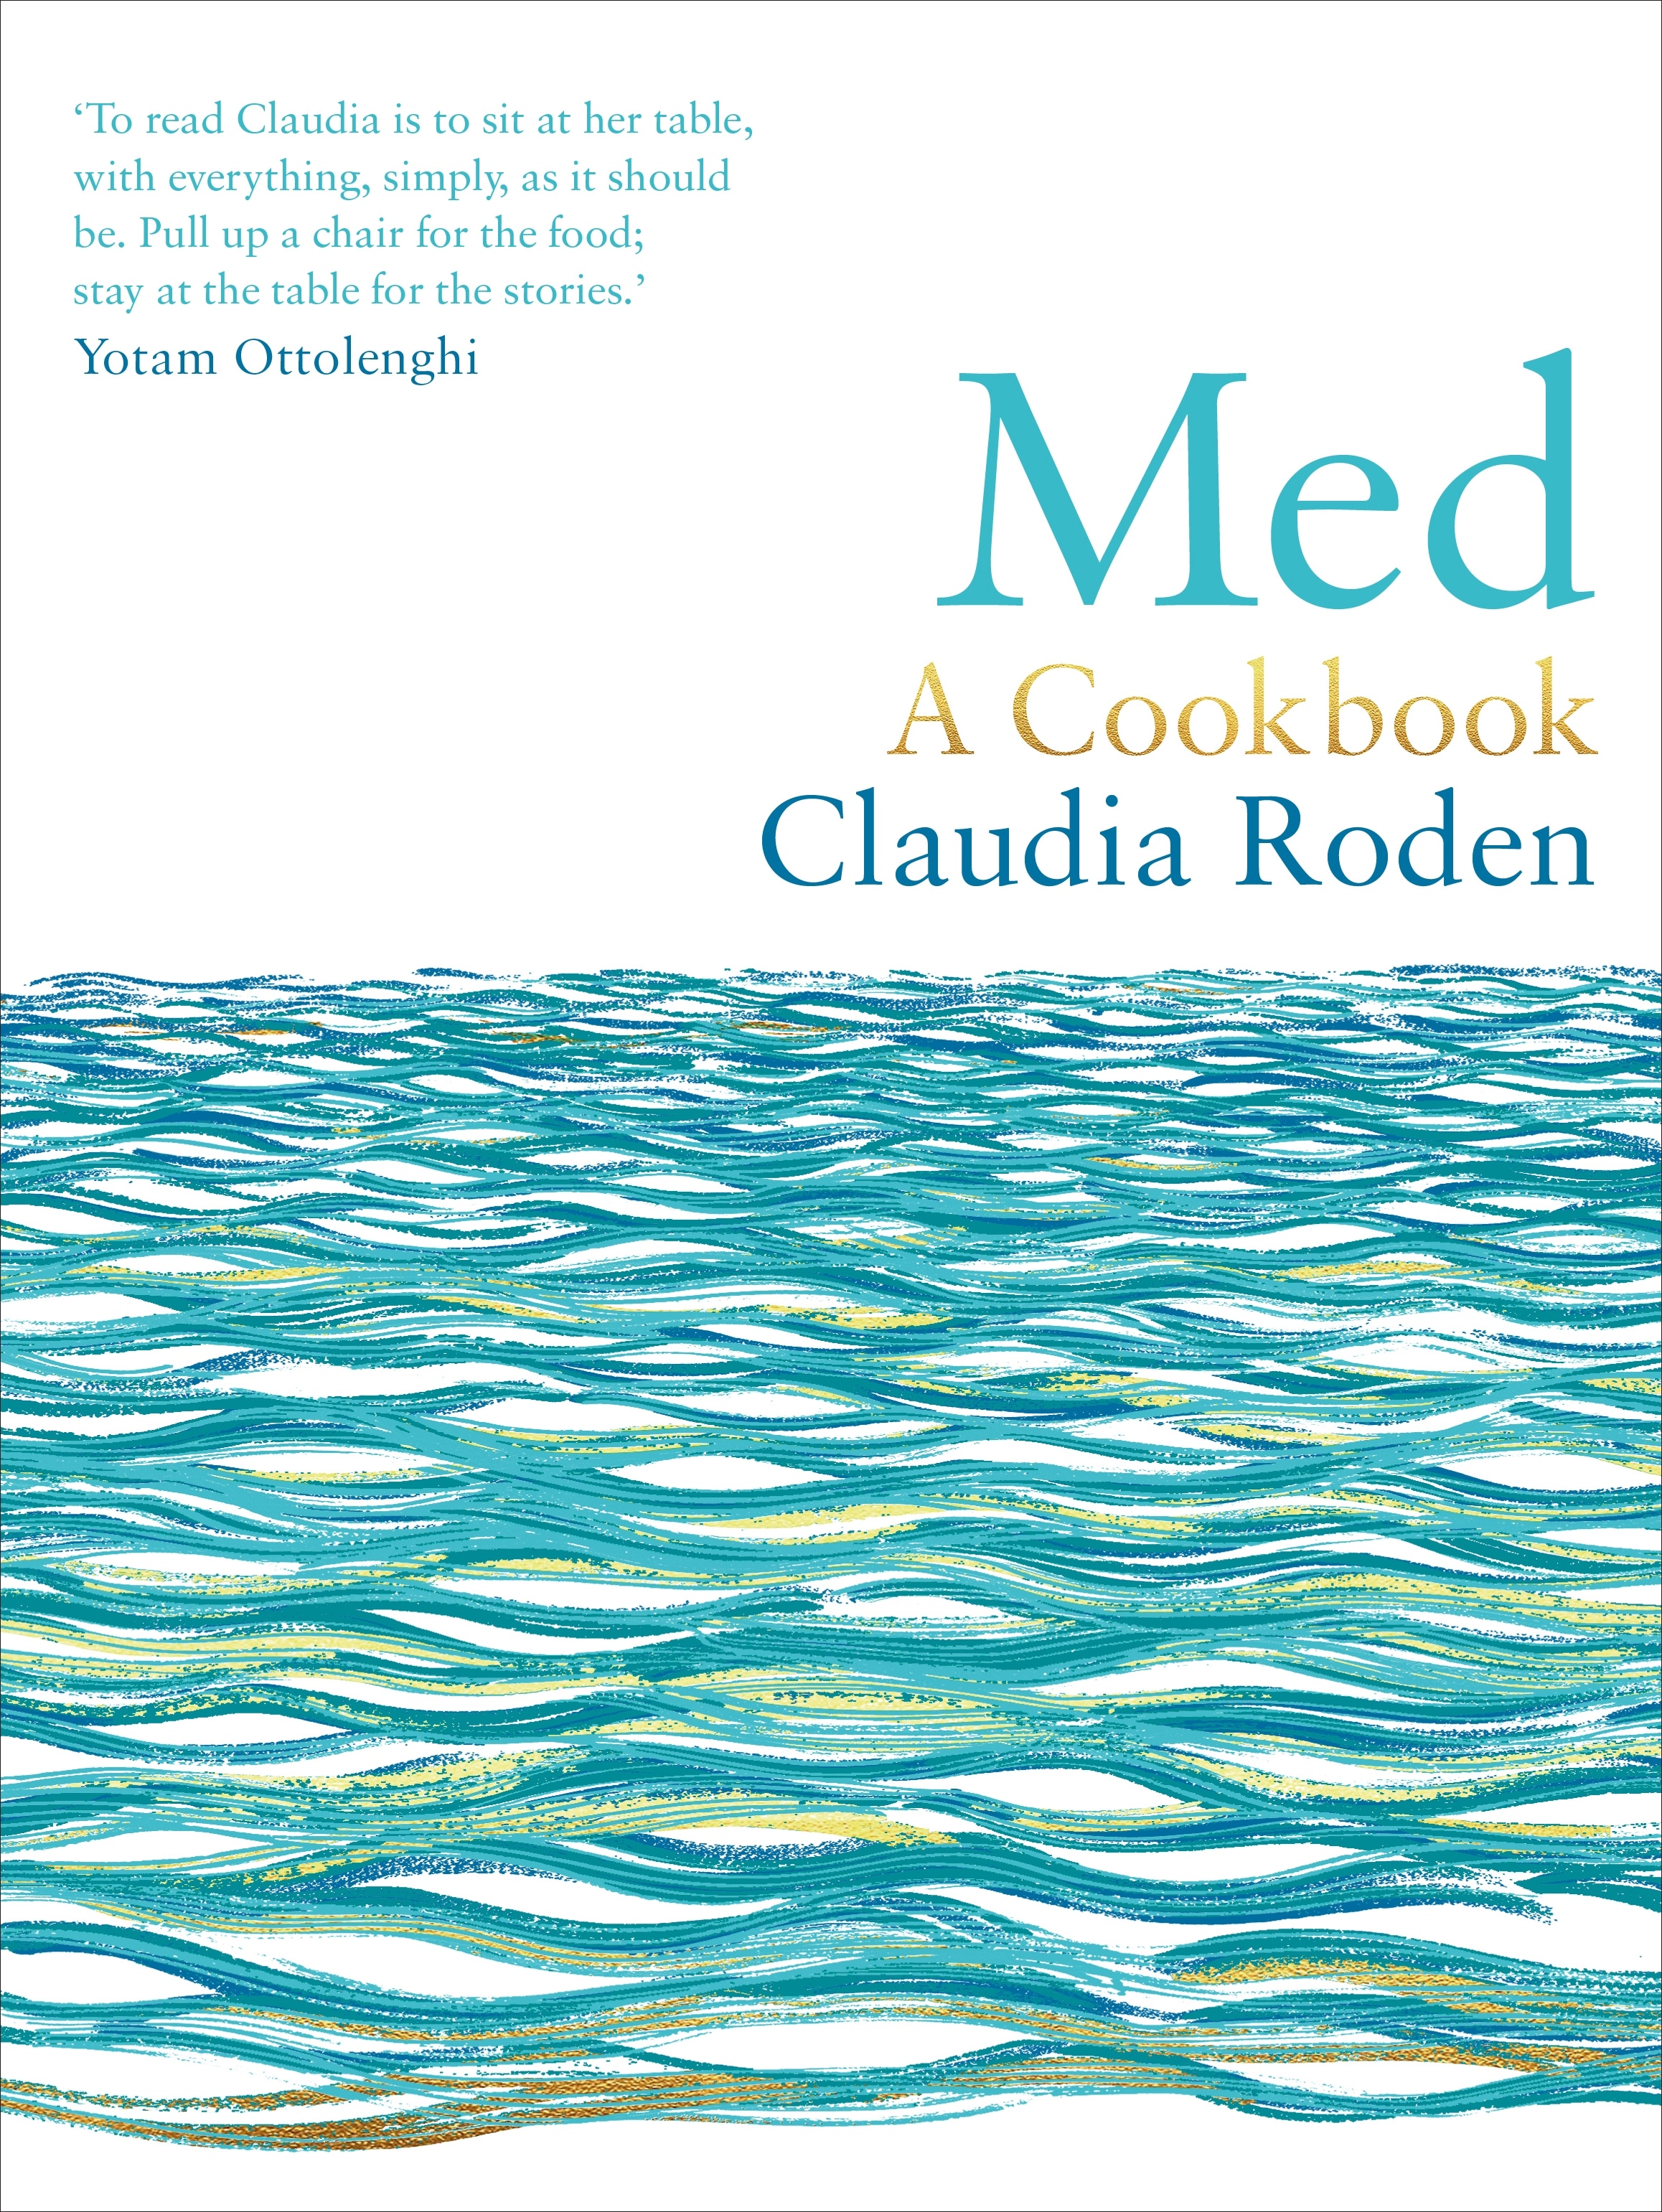 Book “Med” by Claudia Roden — September 2, 2021